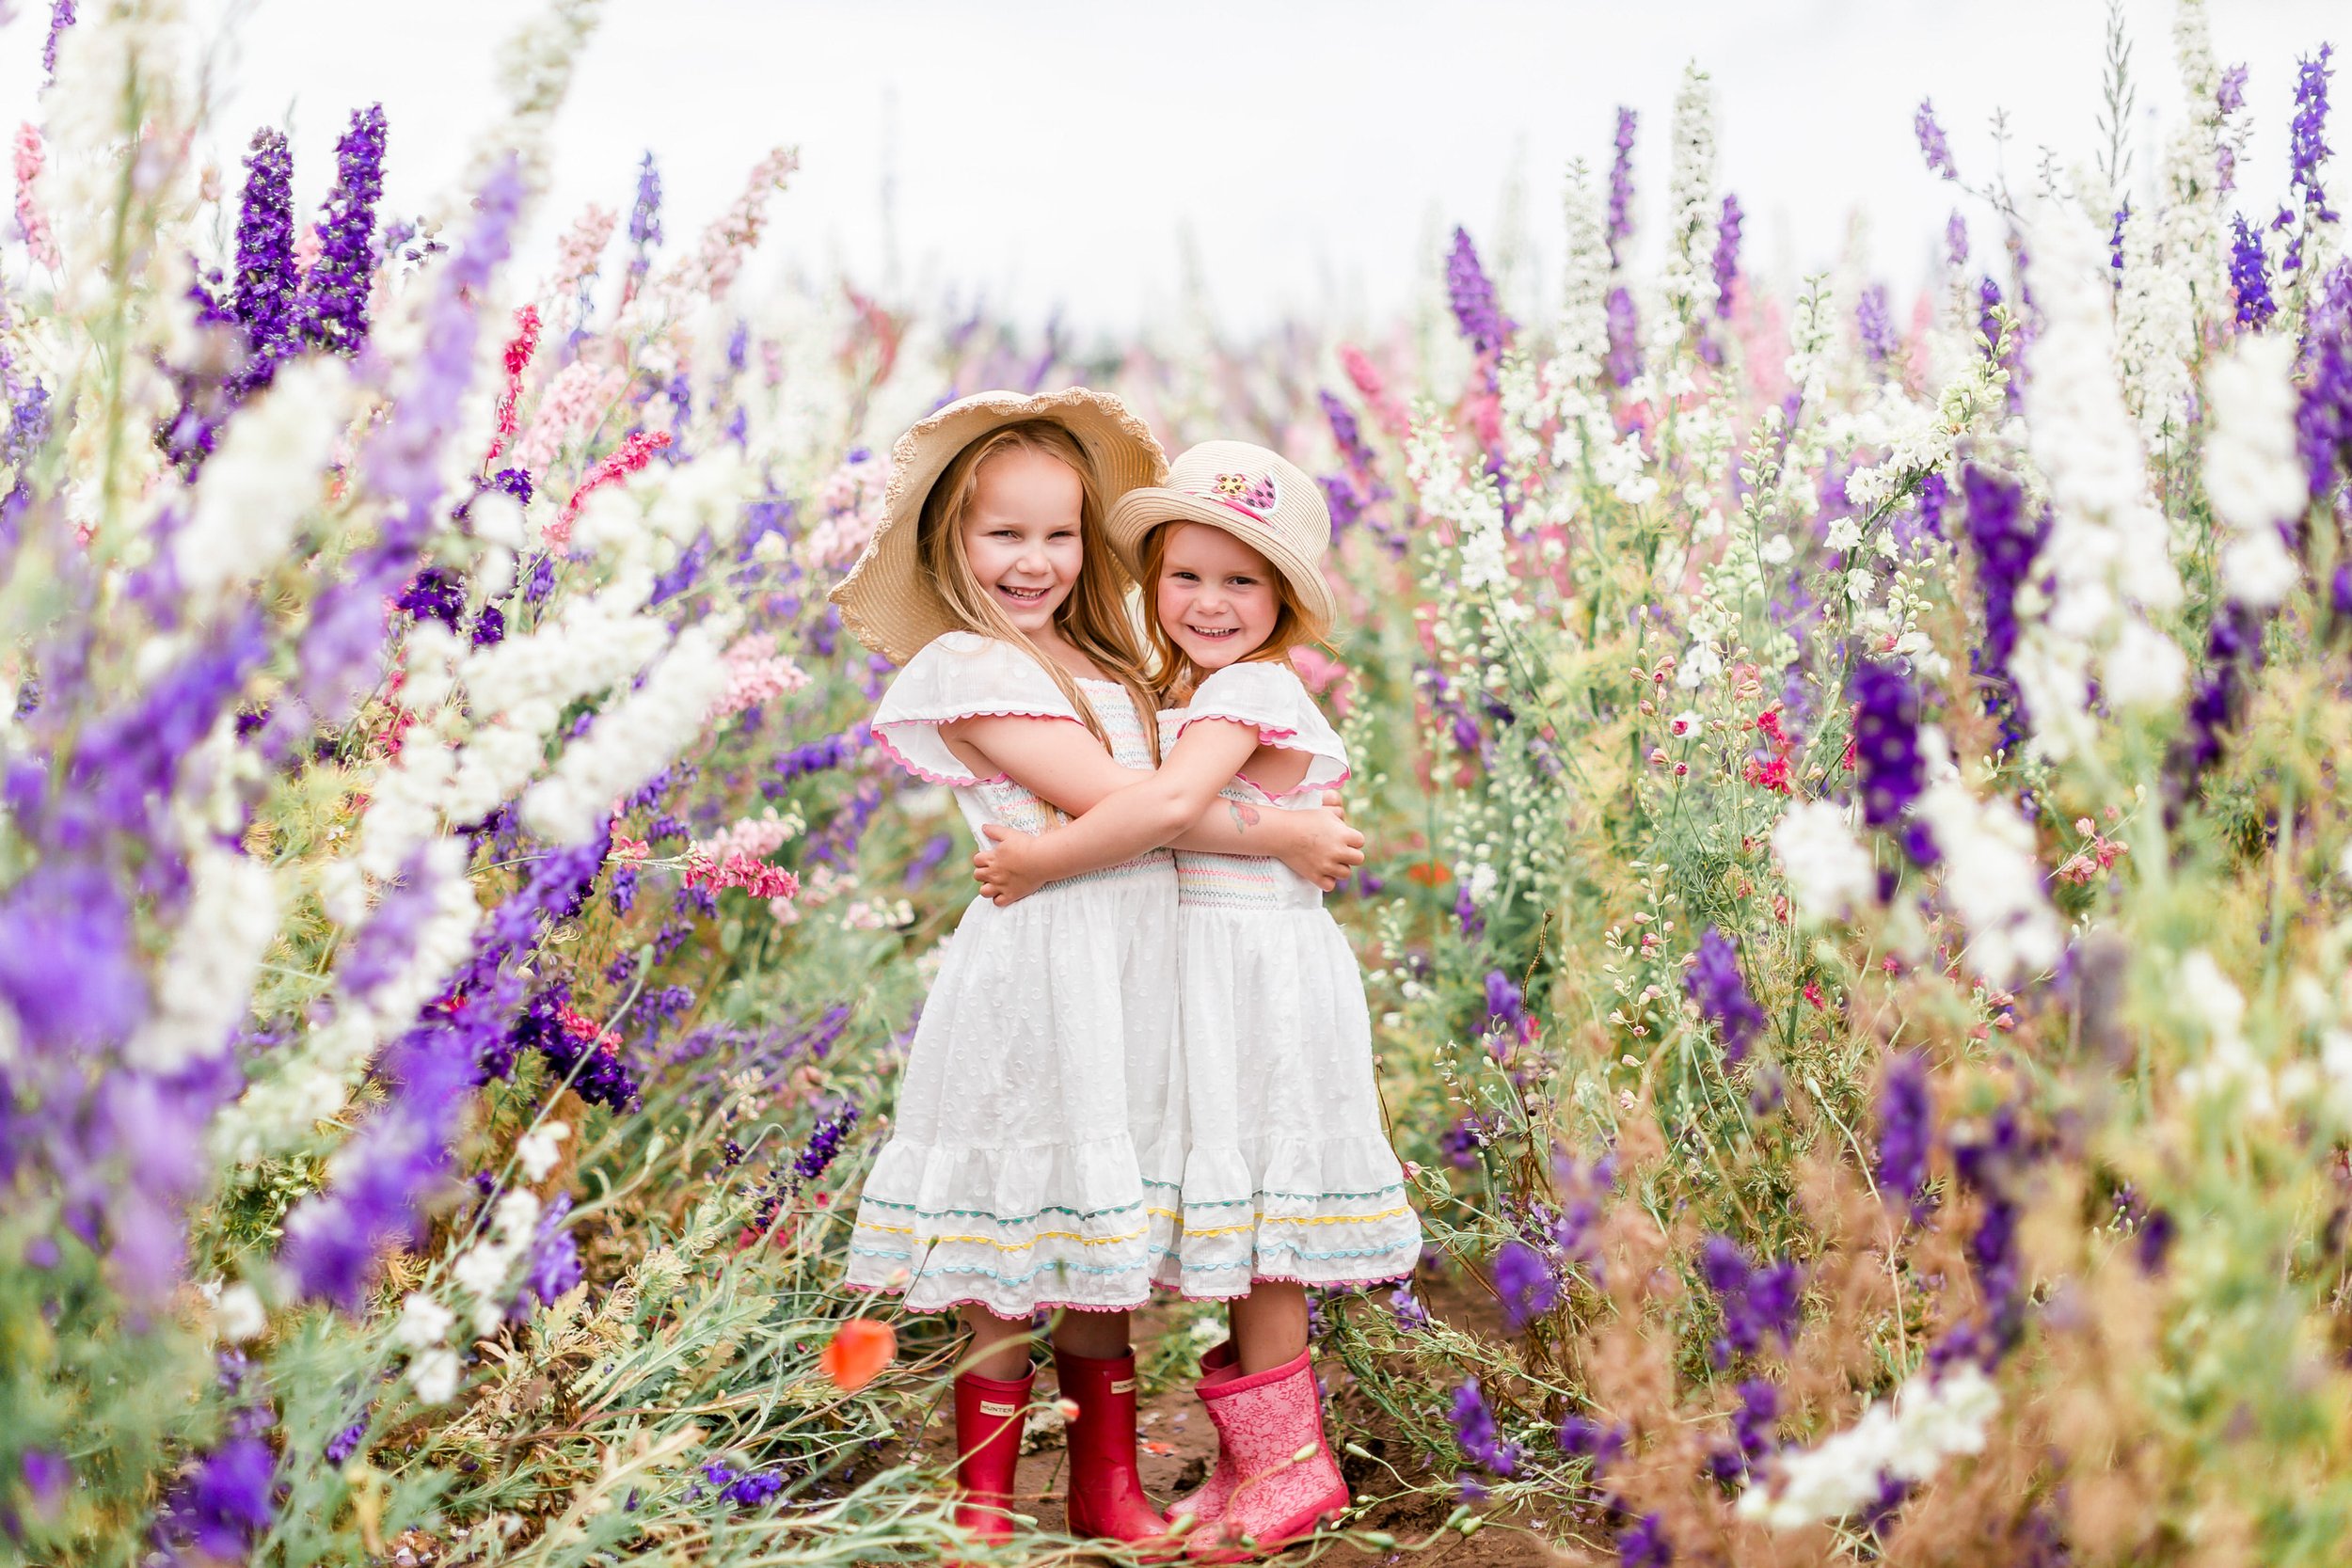 Iris_and_Ivy_Family_Photography_confetti_fields-13.jpg